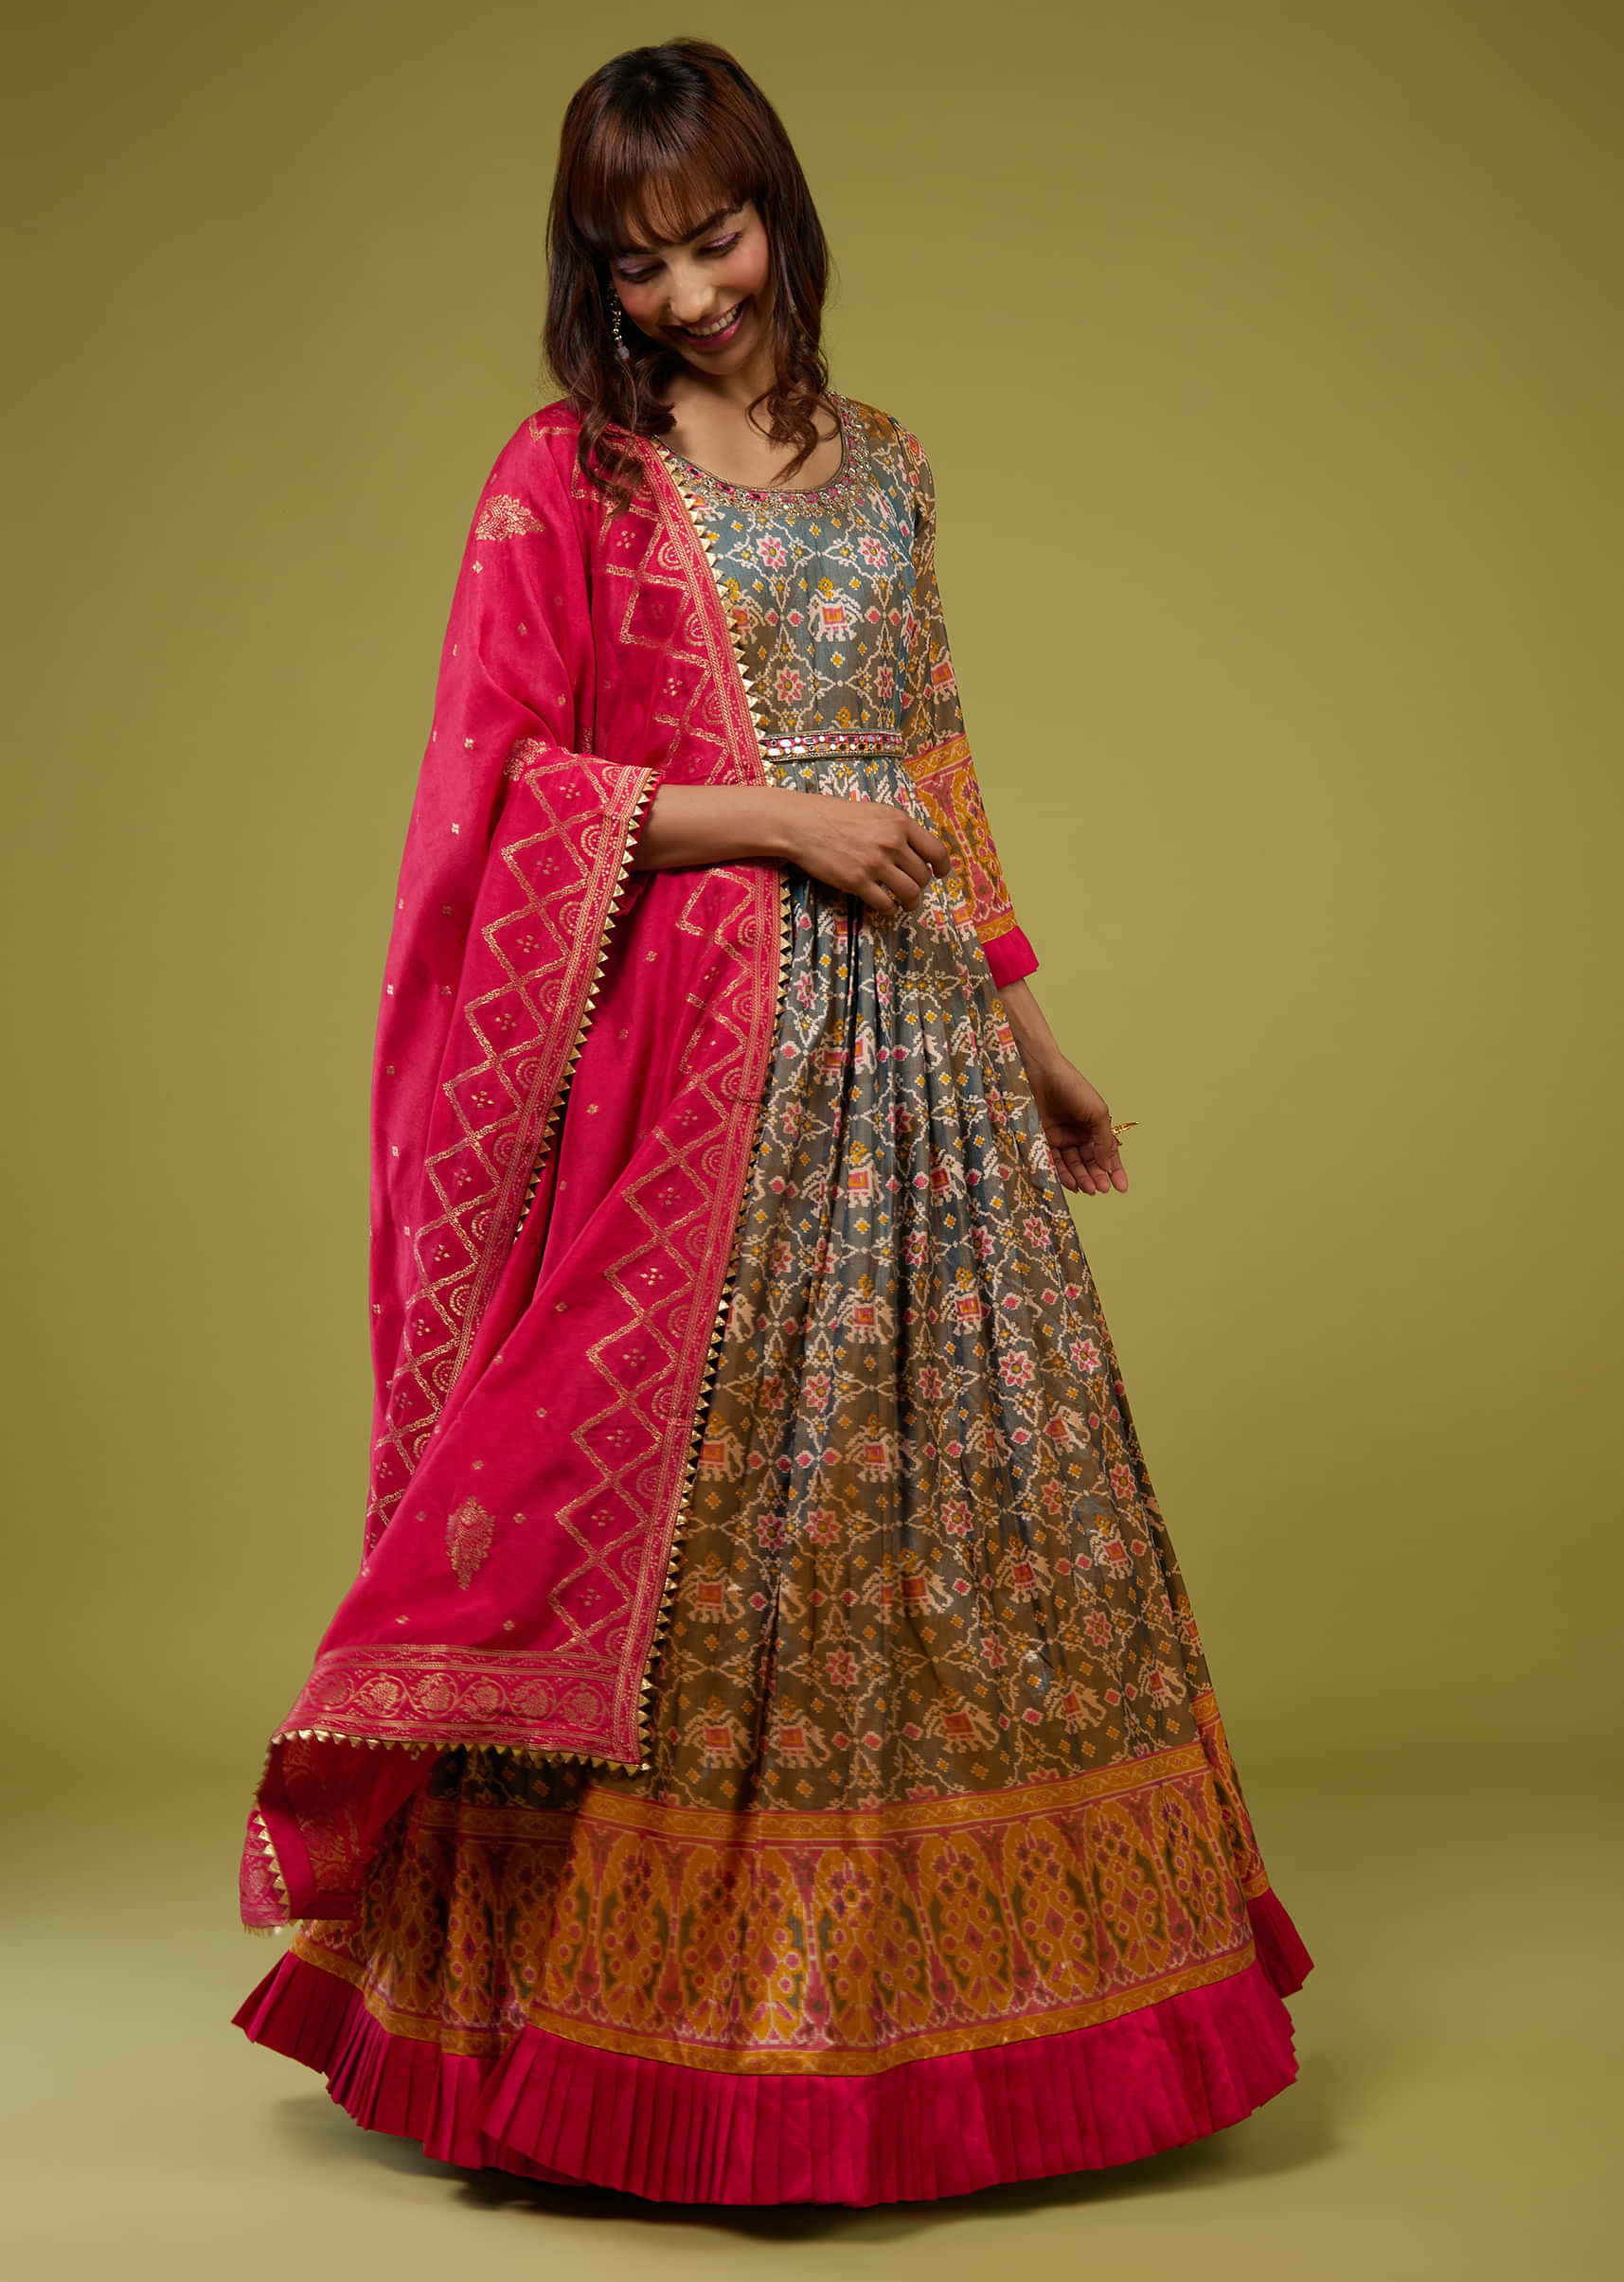 Forest Green With Ocher Yellow Patola Print Anarkali Set In Cotton Silk